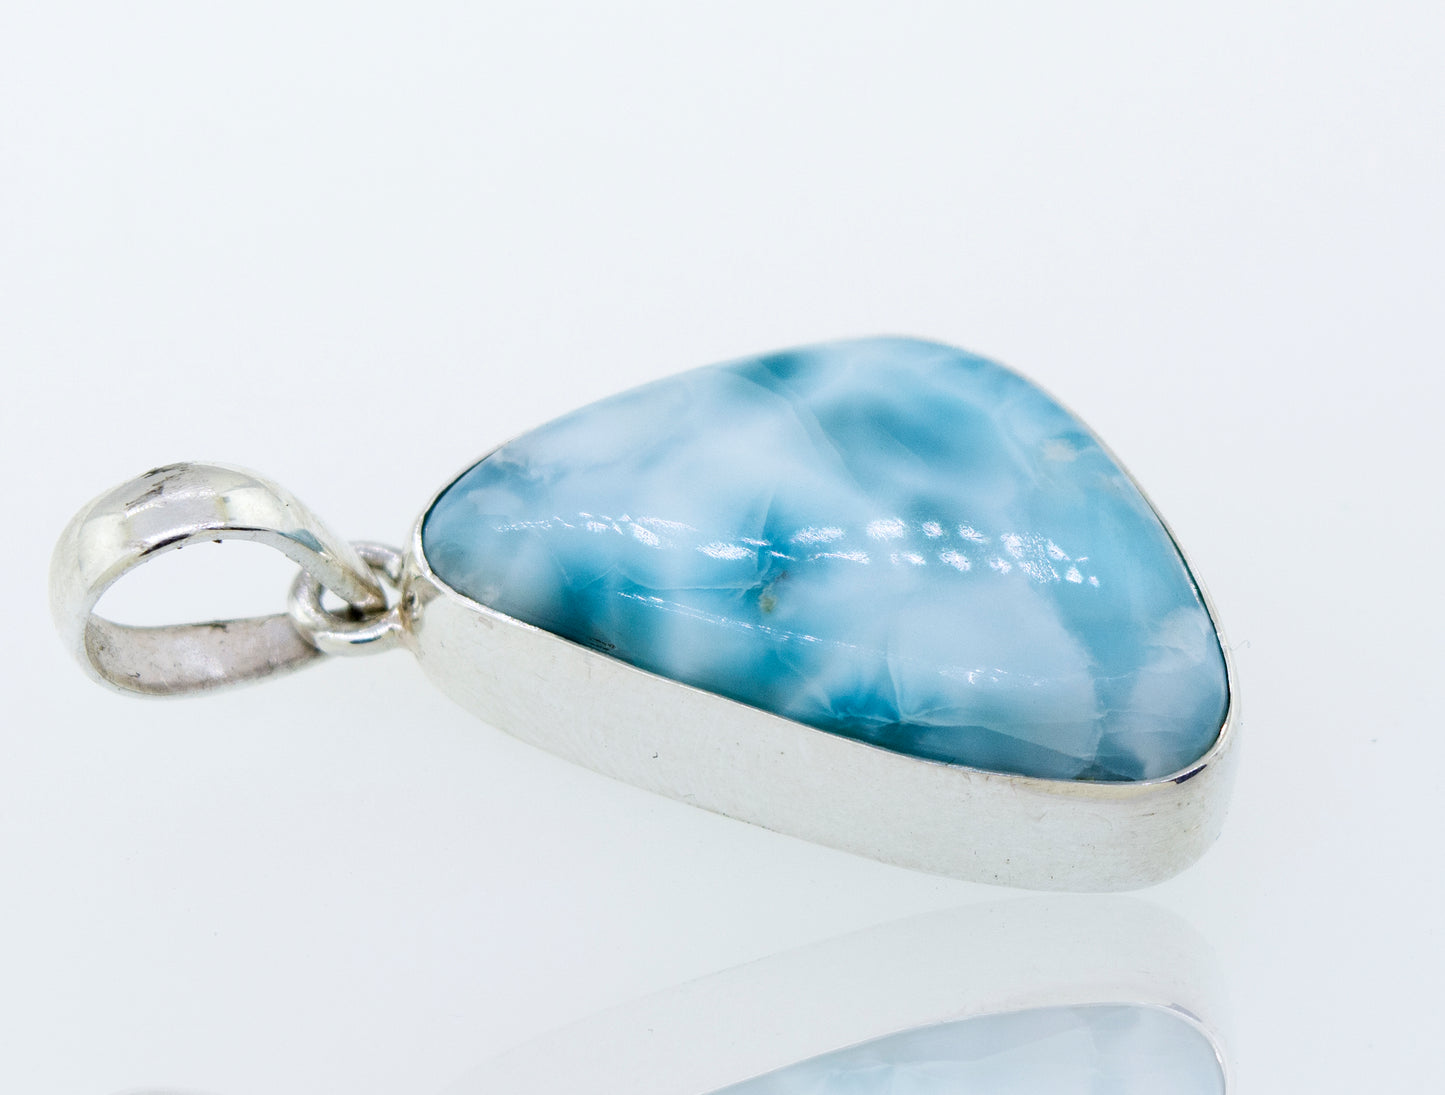 An impressively crafted Medium Larimar Pendant from Super Silver, with a captivating blue stone.